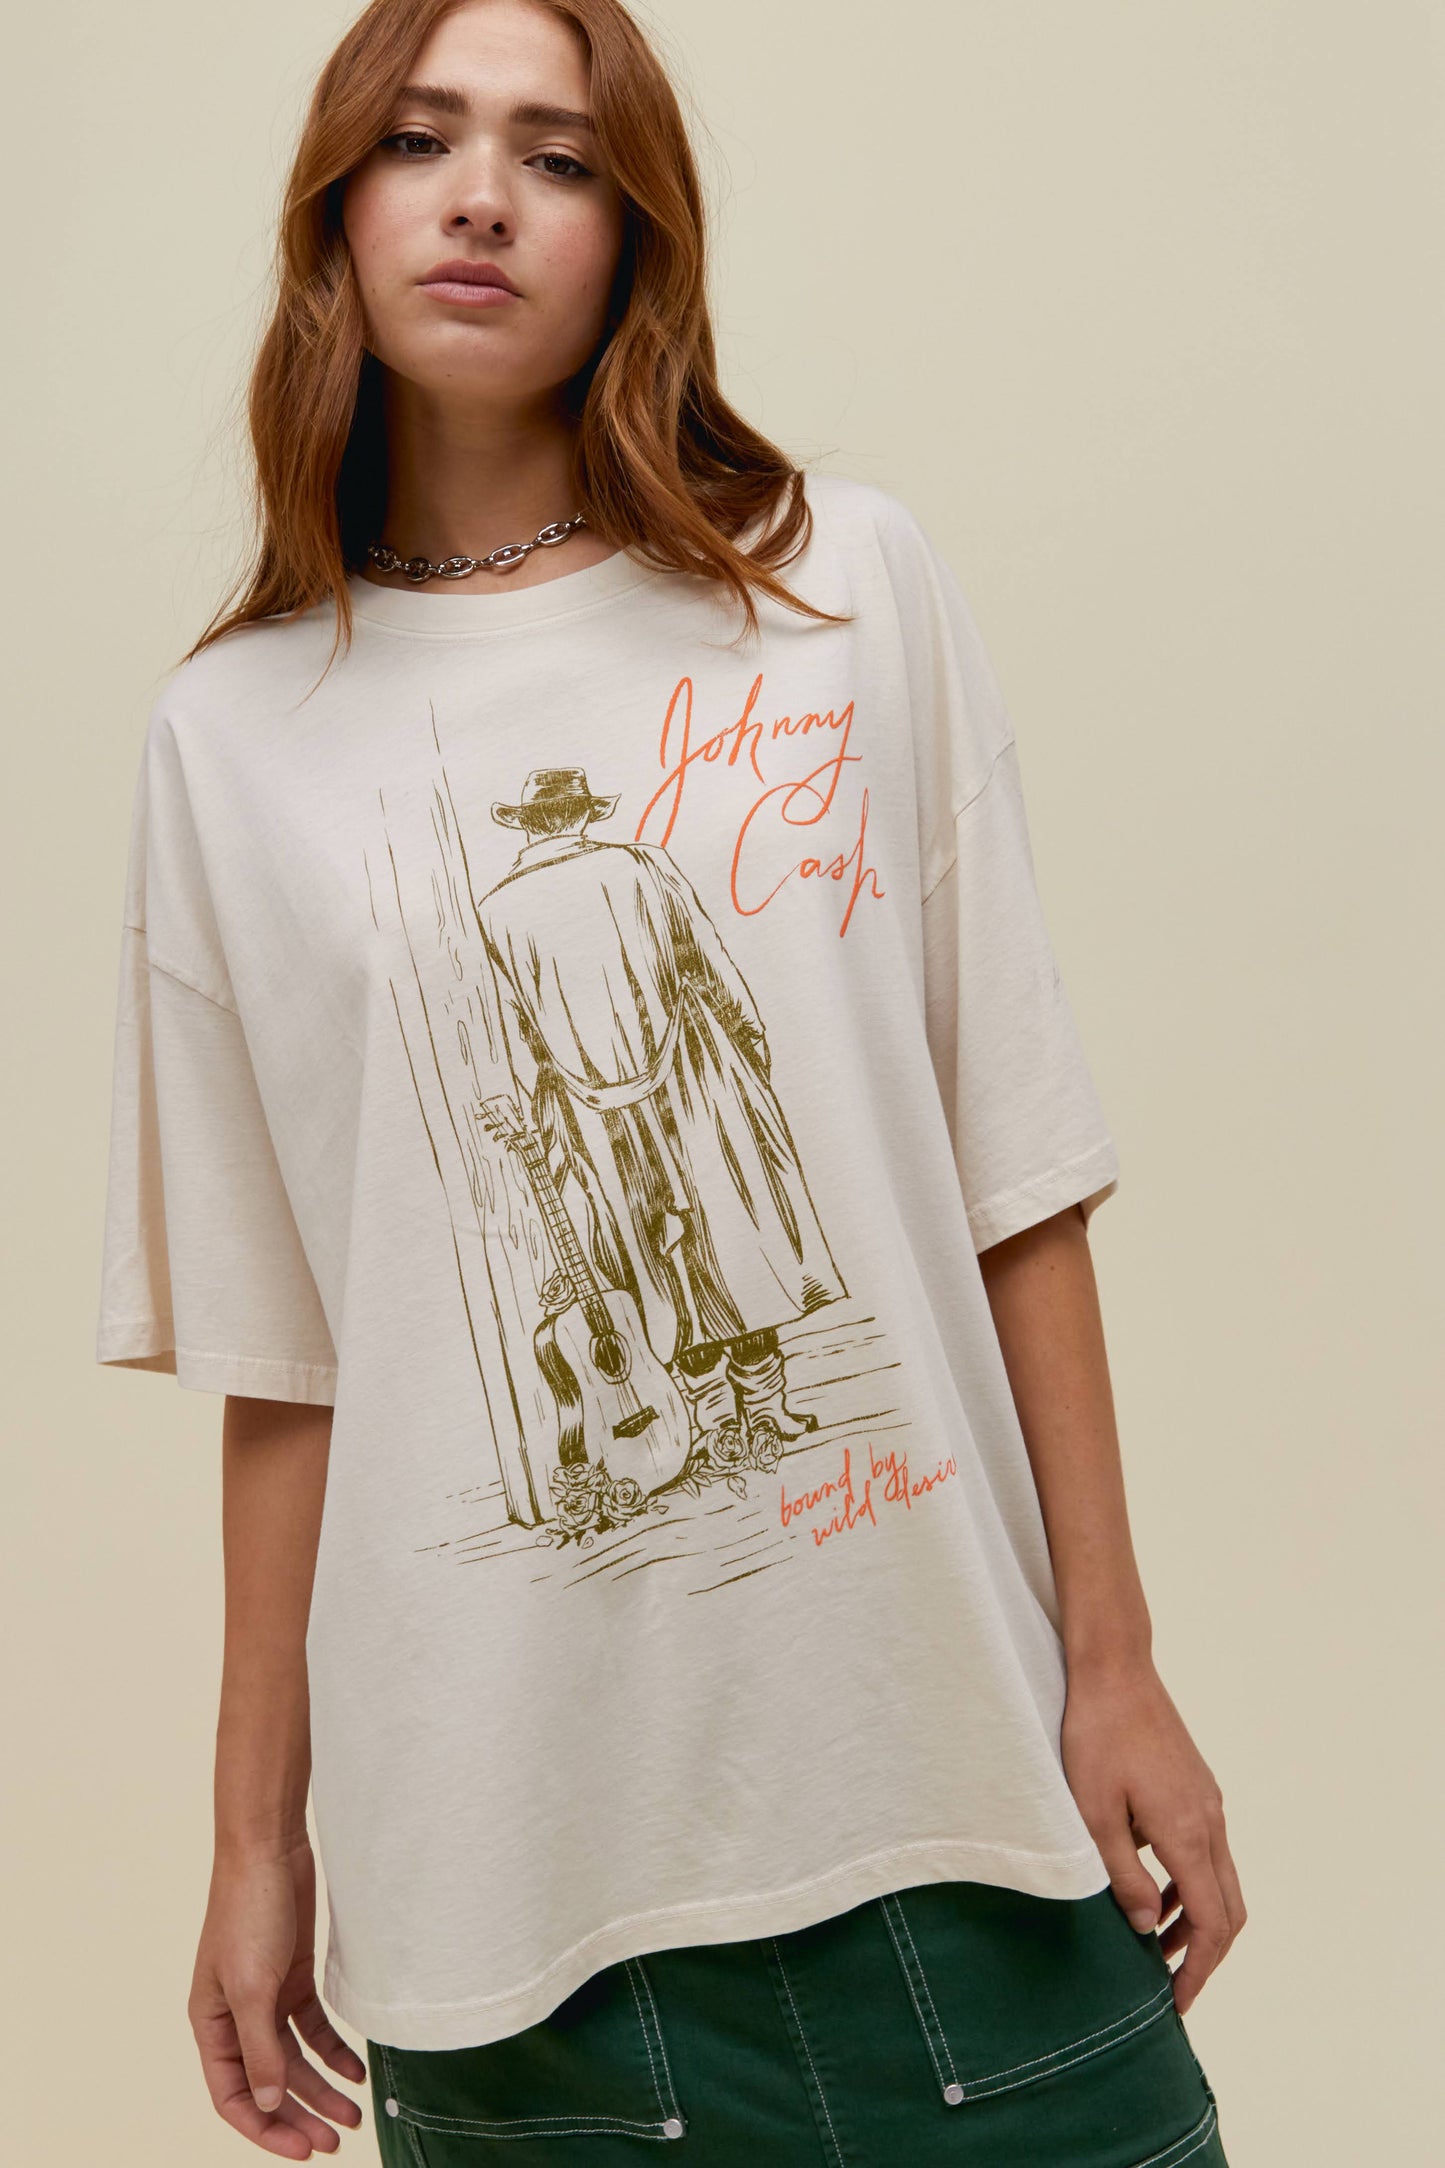 Model wearing an oversized Johnny Cash graphic tee in off white with puff ink autograph detailing.